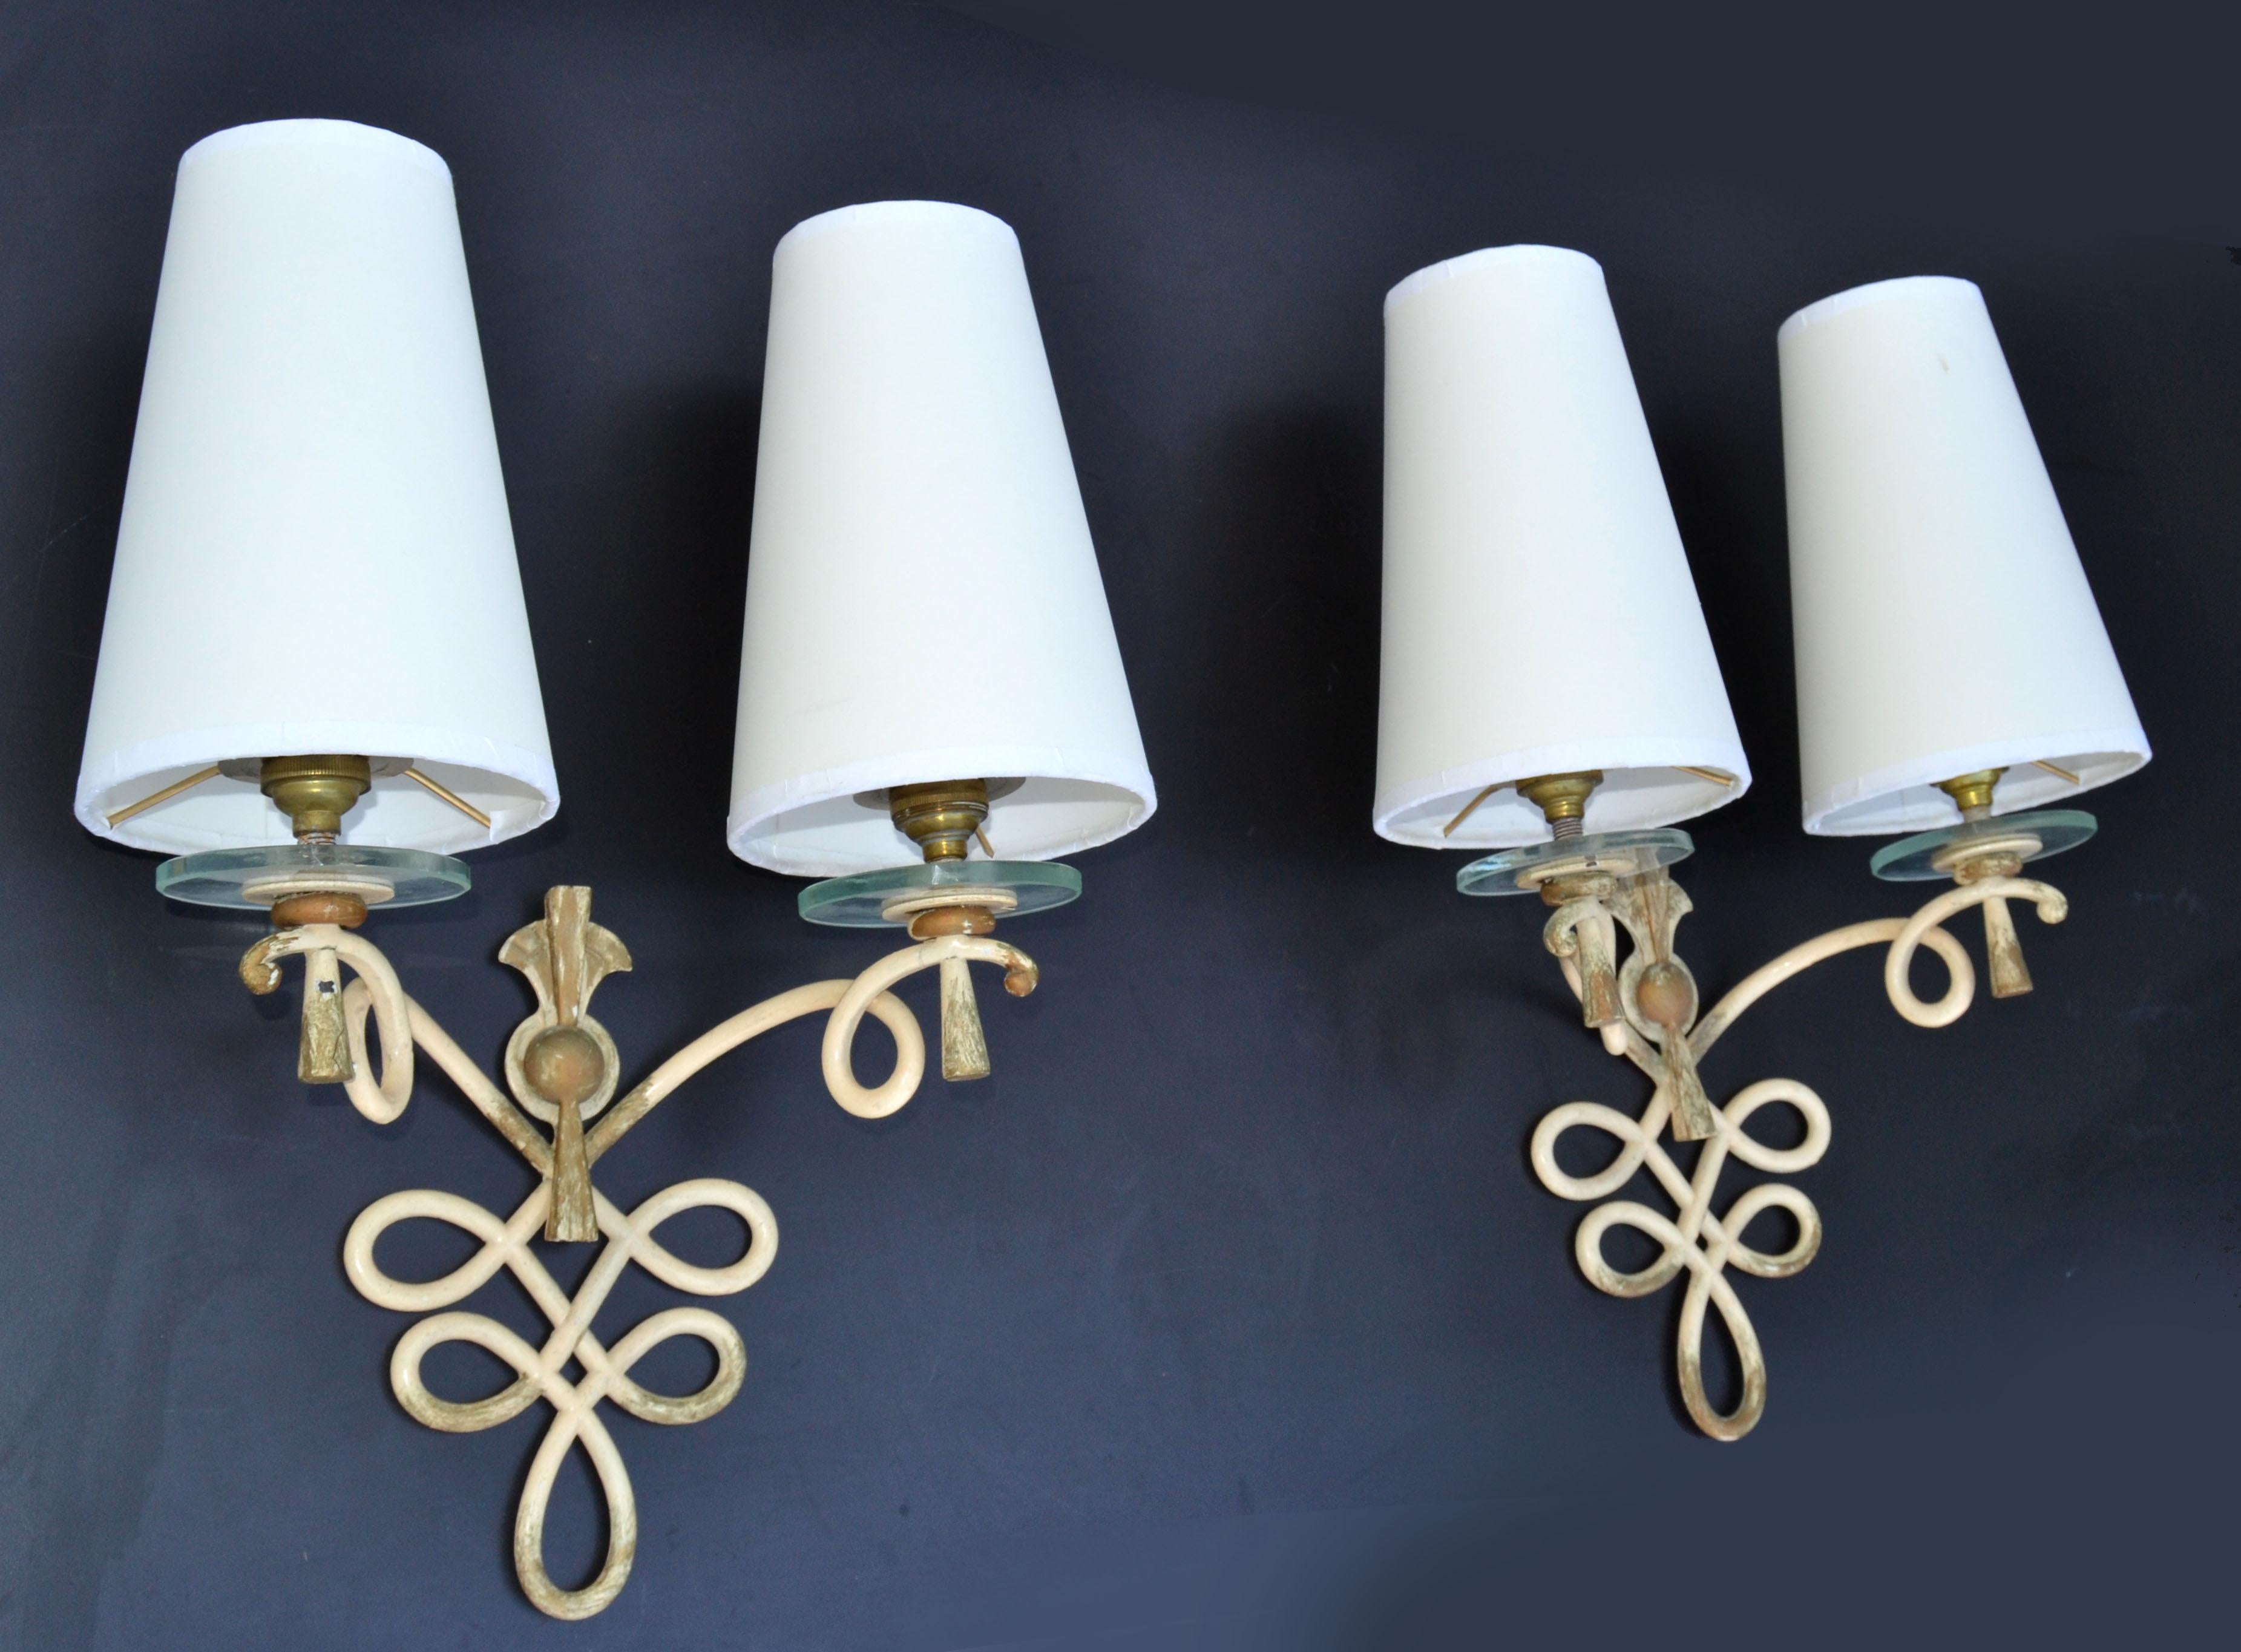 French Wrought Iron & Round Glass Sconces Cone Shades, Wall Lights Art Deco 1940 For Sale 3